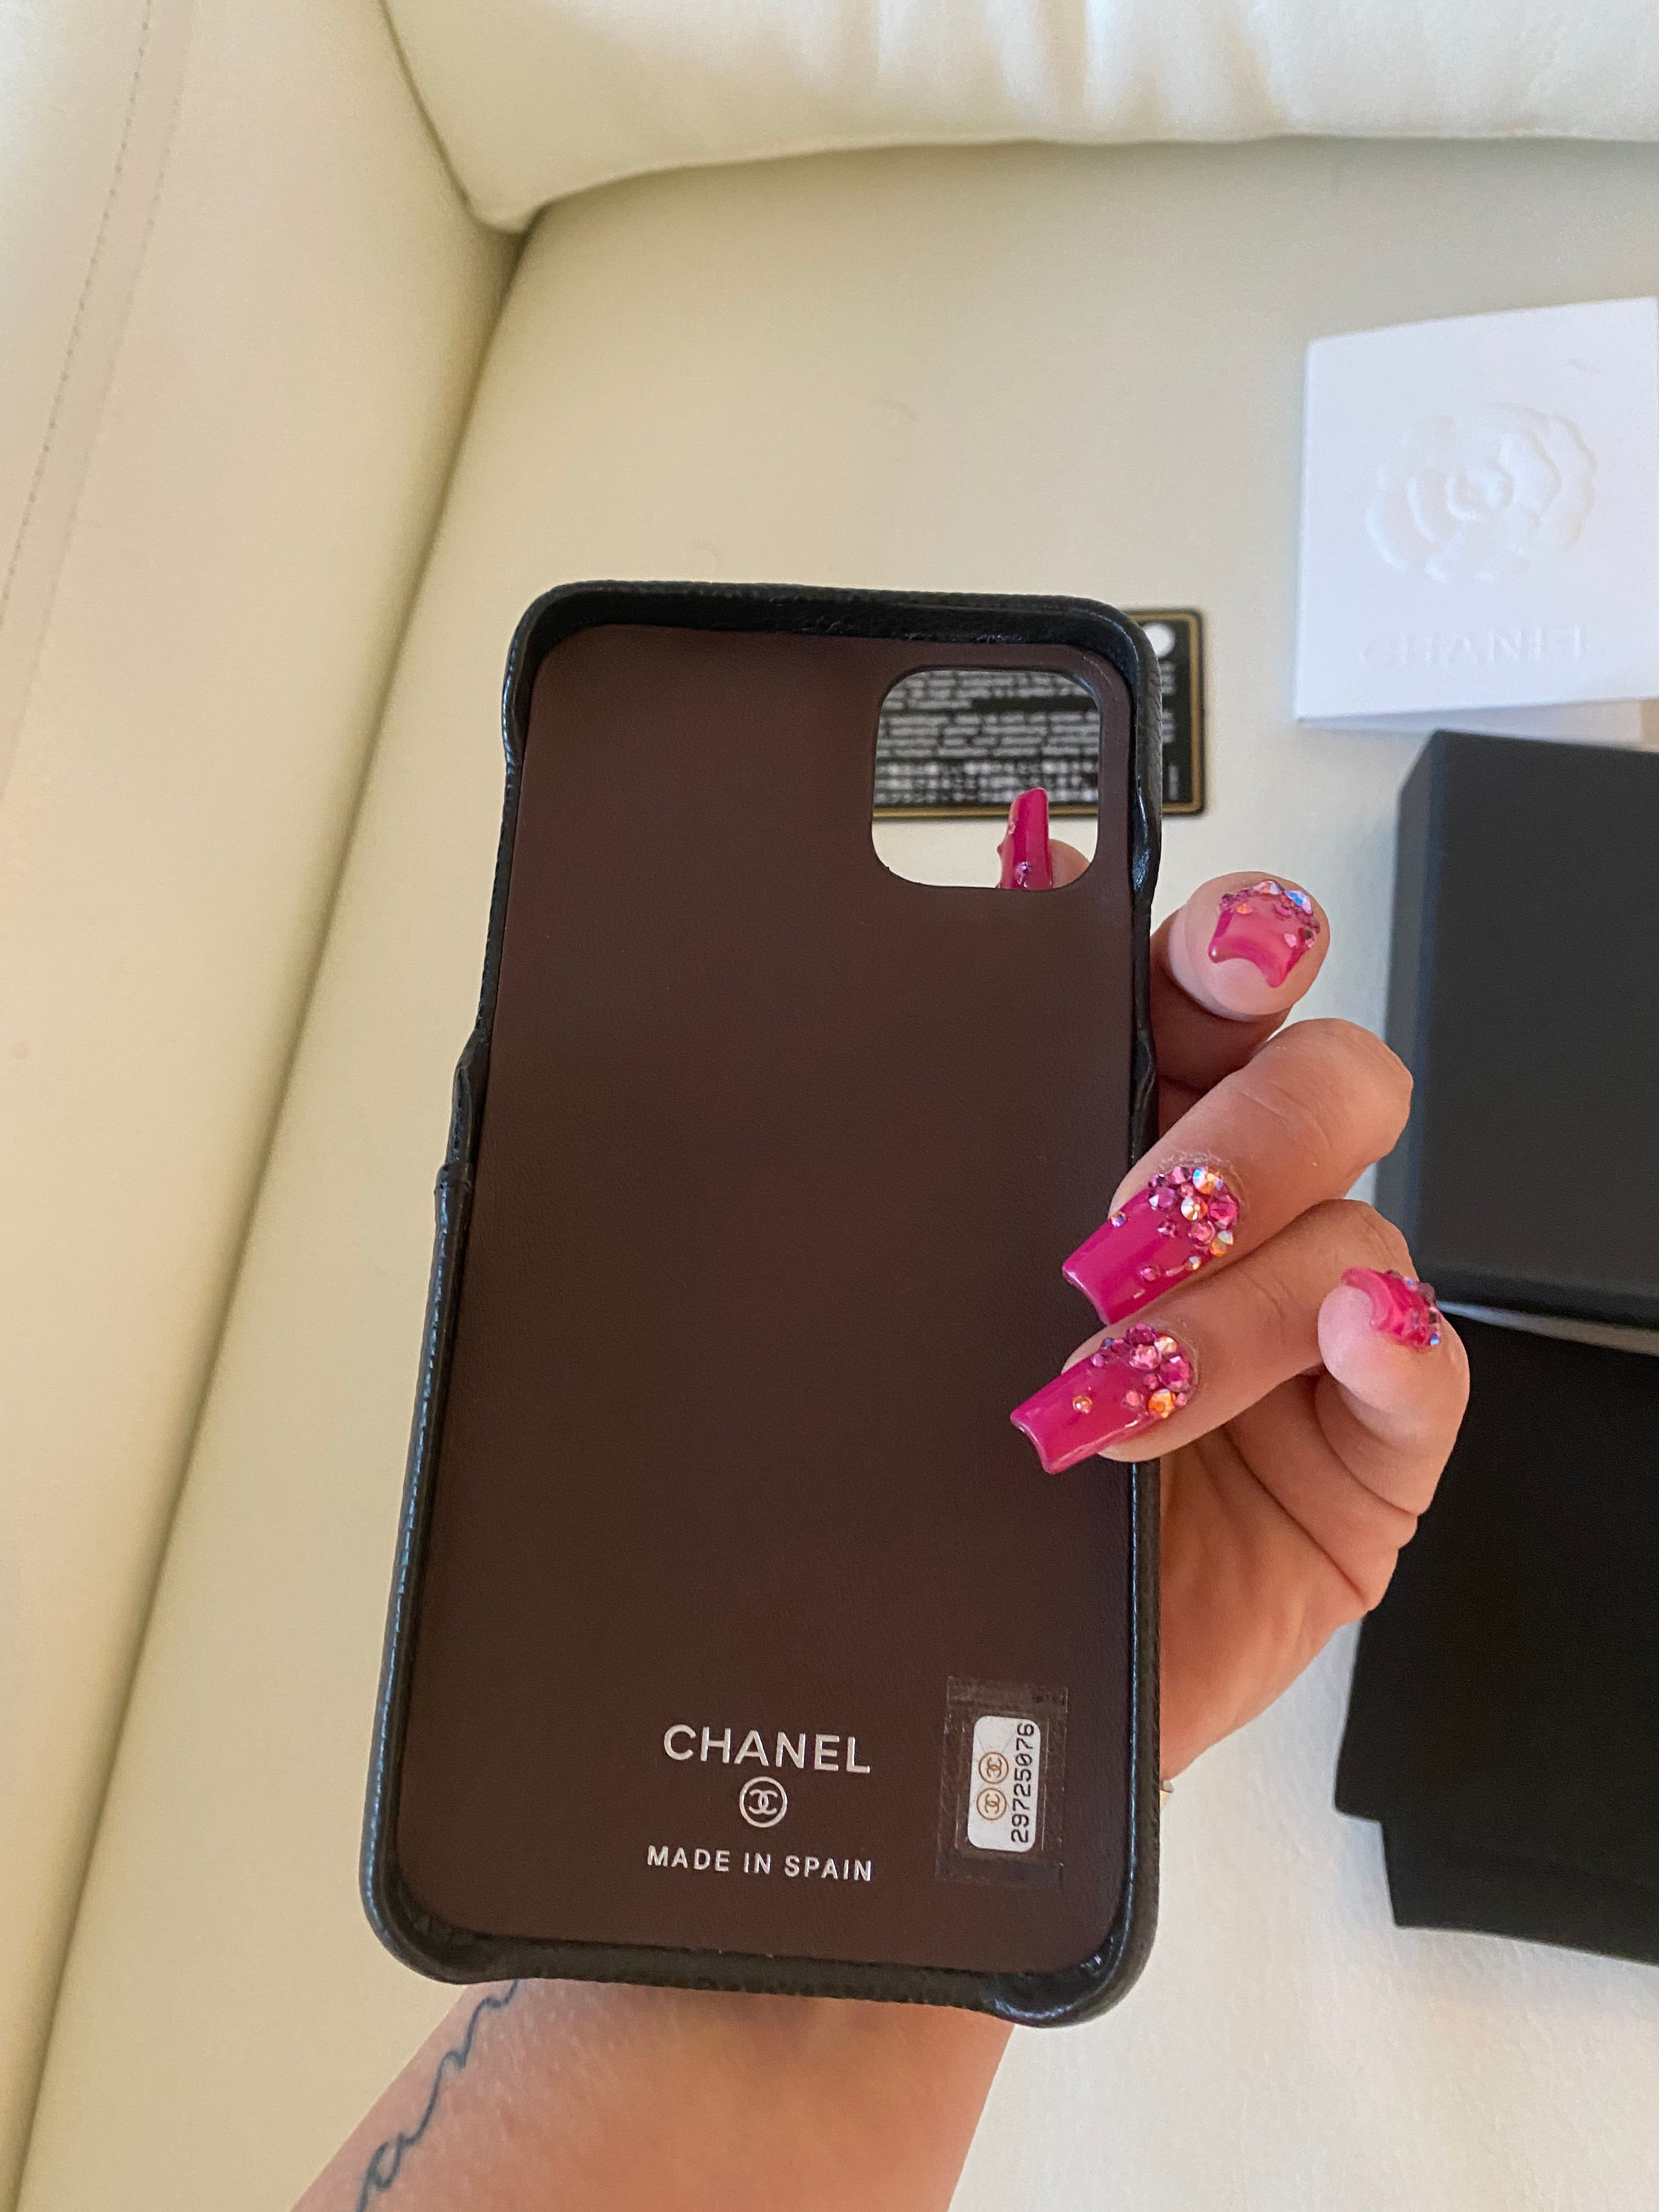 Chanel case IPhone 11 Pro Max